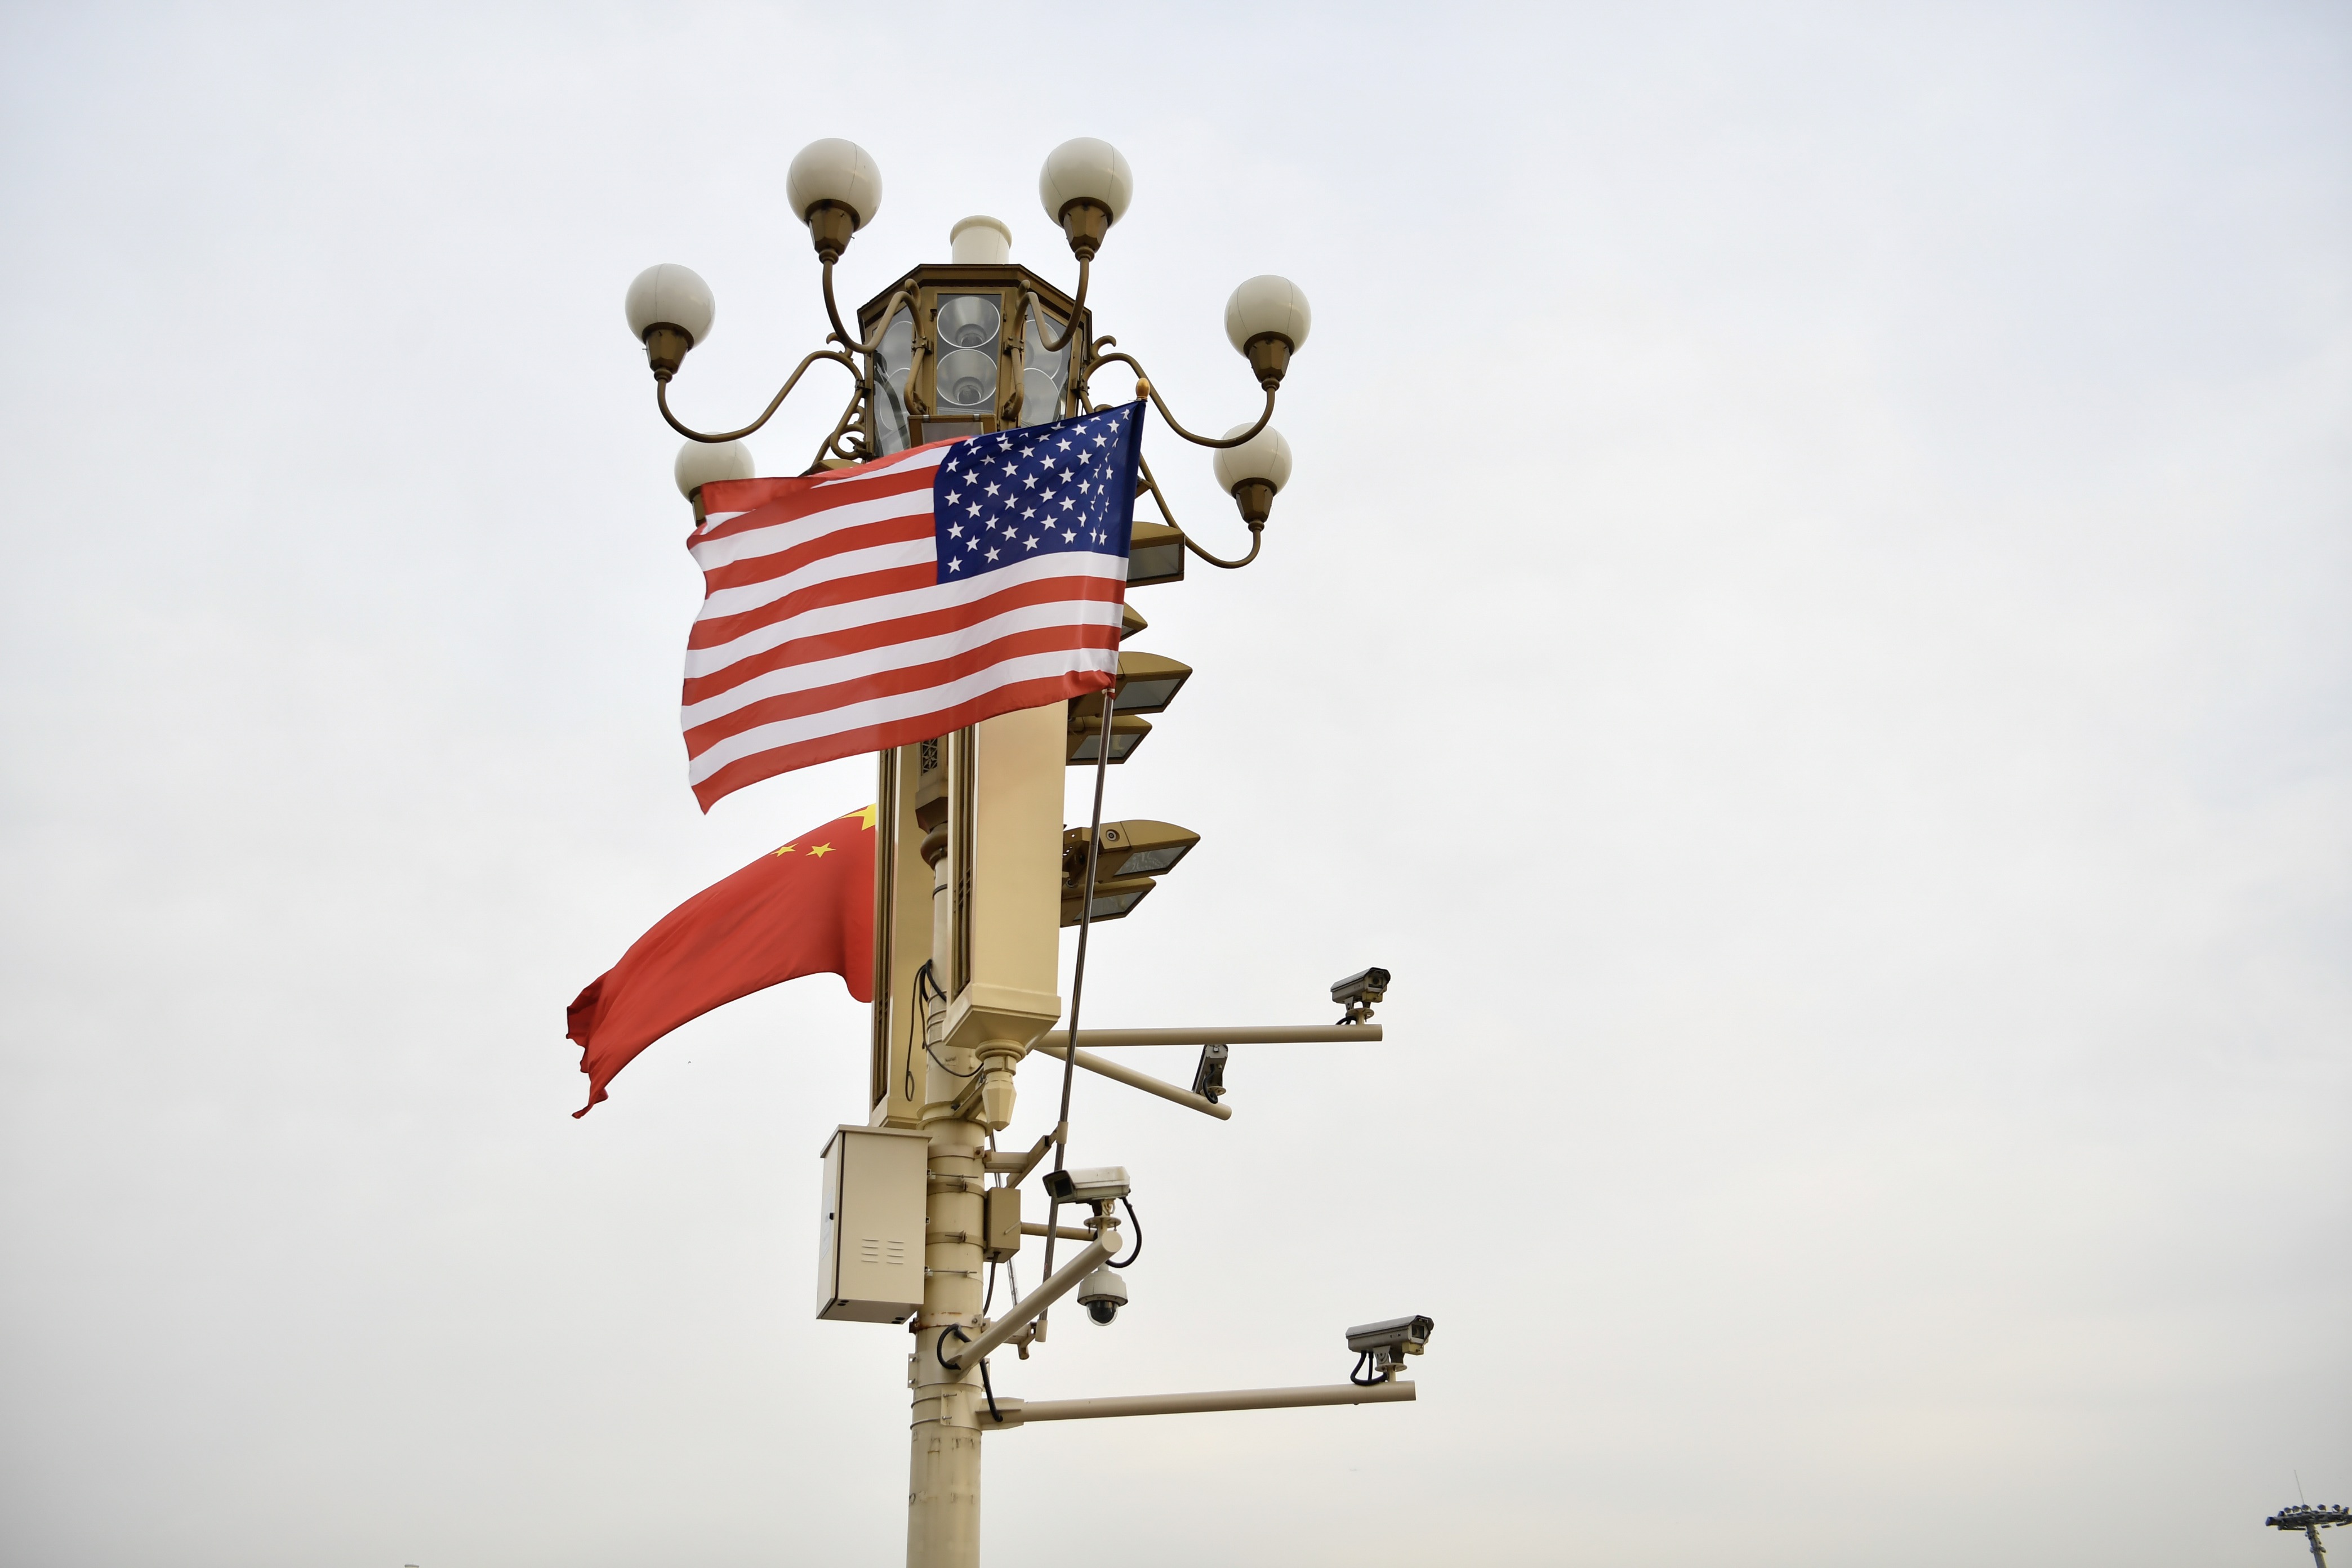 Chinese and American national flags flutter on a lamppost in front of the Tian'anmen Rostrum during the visit of U.S. President Donald Trump in Beijing, China, 8 November 2017.

Chinese President Xi Jinping and his wife Peng Liyuan invited U.S. President Donald Trump and his wife Melania Trump to the Palace Museum, also known as the Forbidden City, after the U.S. president started his state visit to China Wednesday afternoon.
Xi and Peng welcomed the guests with afternoon tea at the Hall of Embodied Treasures in the southwestern corner of the Forbidden City.No Use China. No Use France.